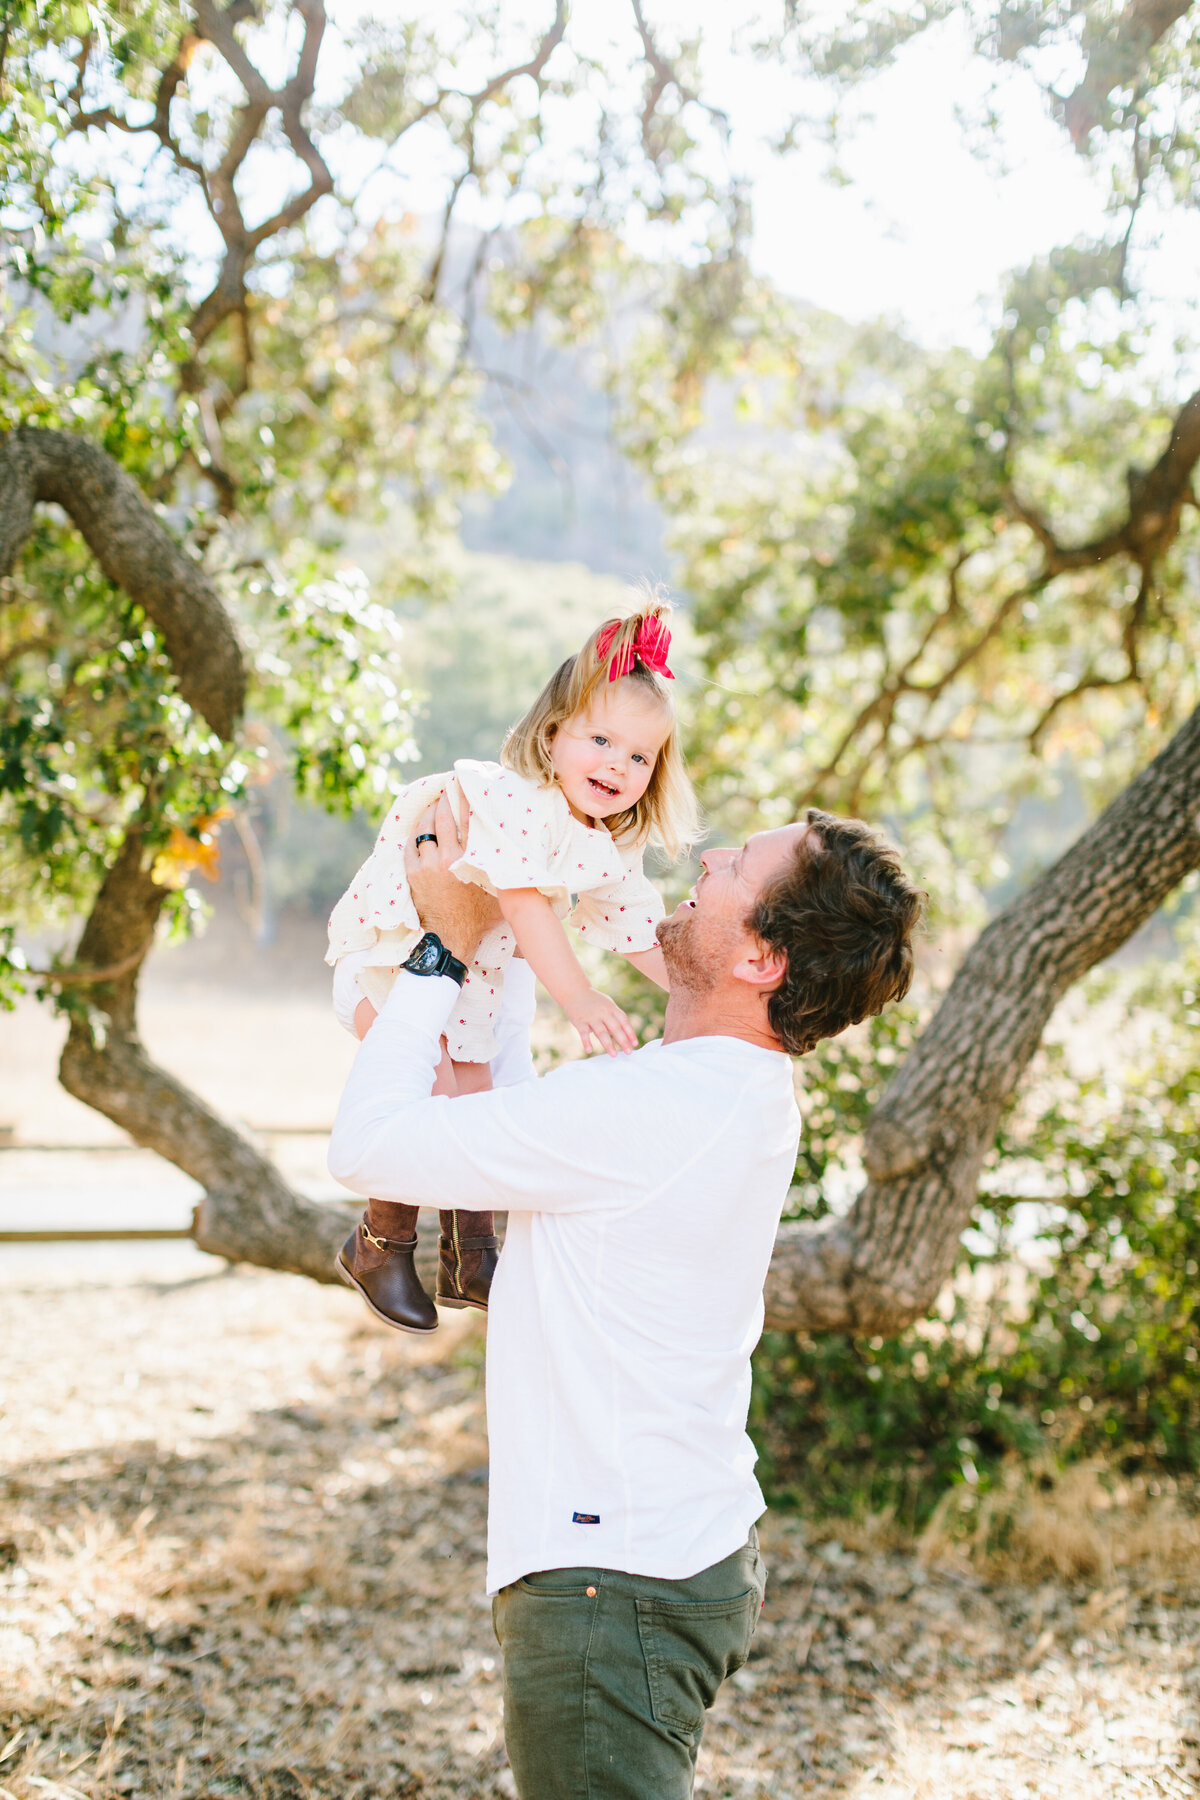 Best California and Texas Family Photographer-Jodee Debes Photography-227